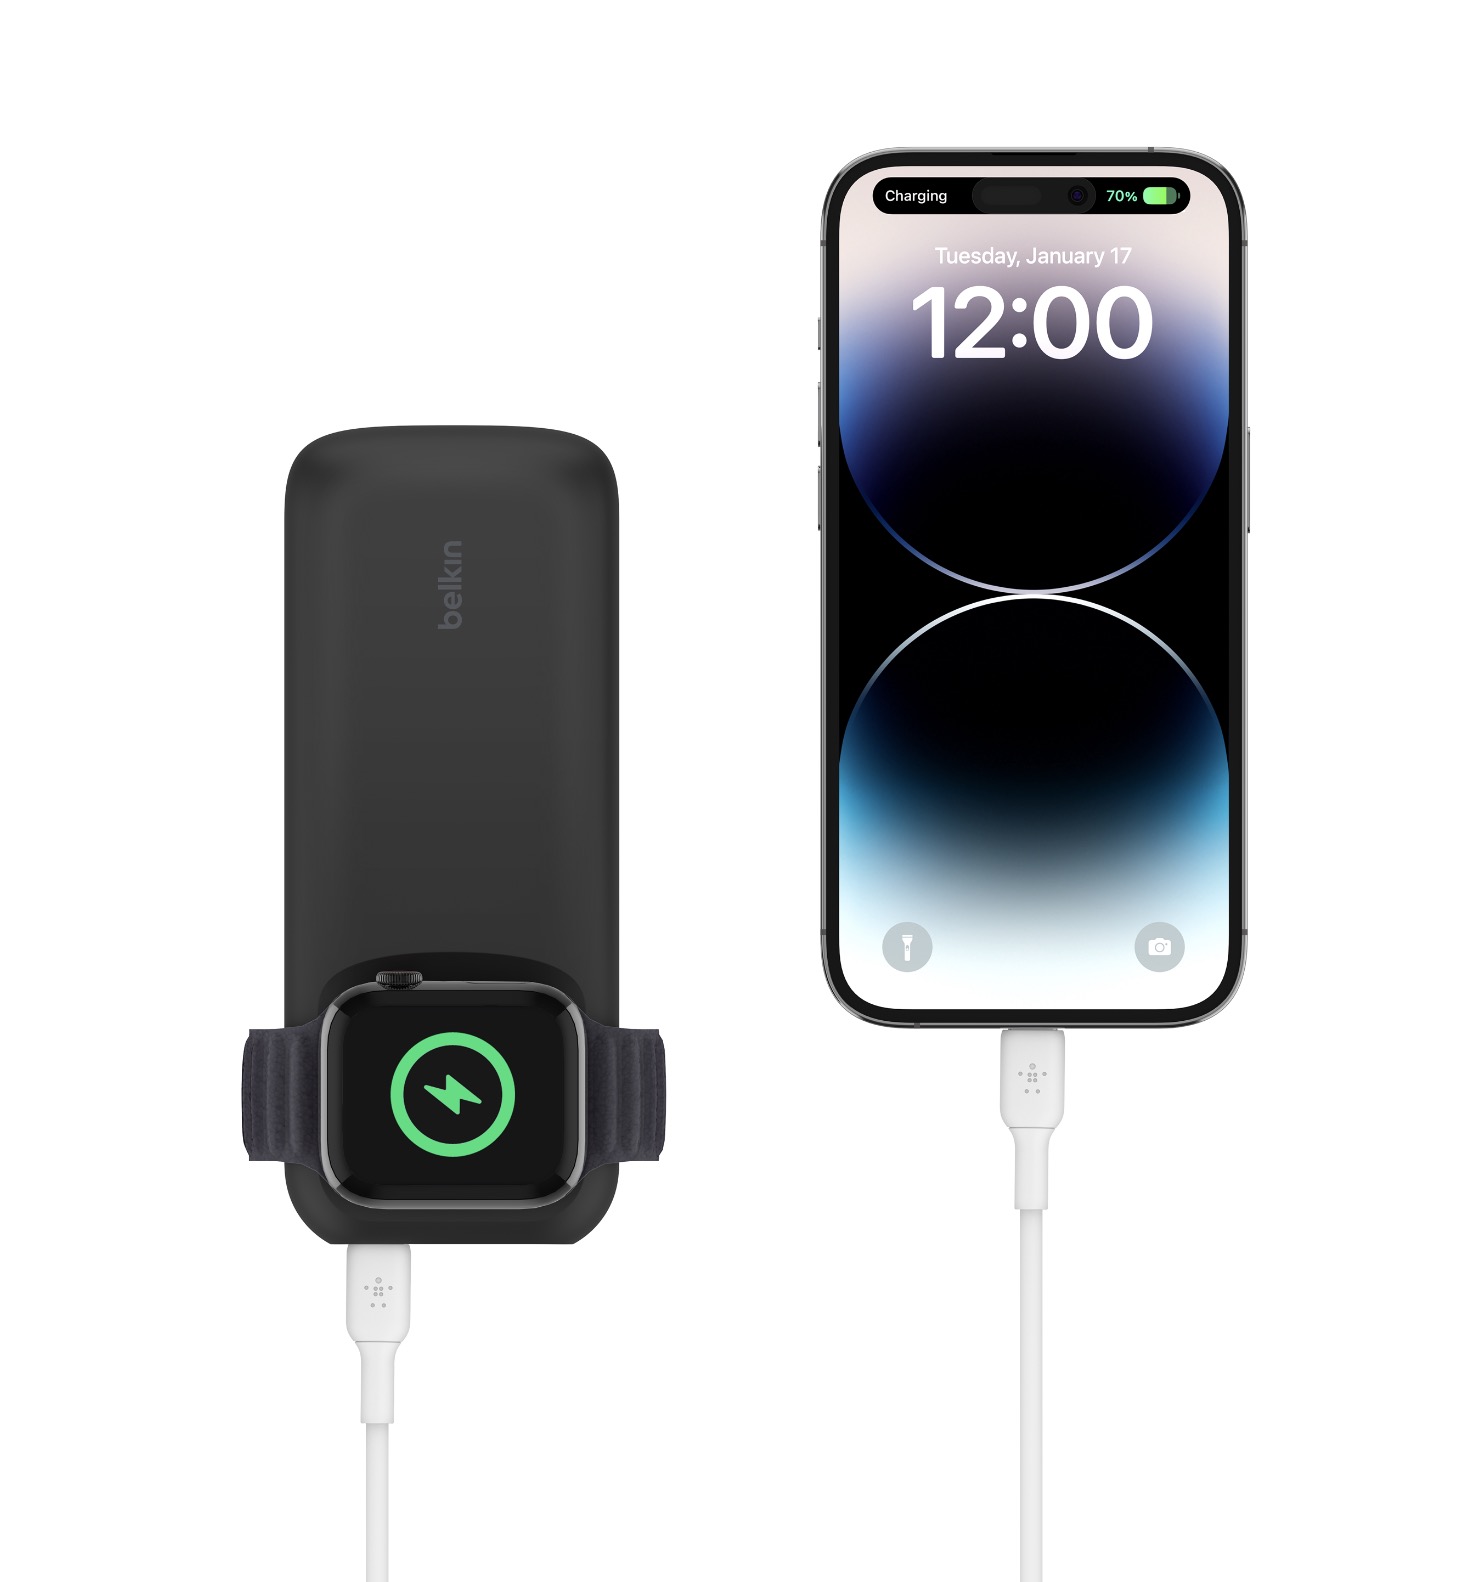 Belkin Powerhouse Charge Dock for Apple Watch + iPhone Charging Dock for  iPhone Xs, XS Max, XR, X, 8/8 Plus and More, Apple Watch Series 4, 3, 2, 1  (White) – plentifultravel